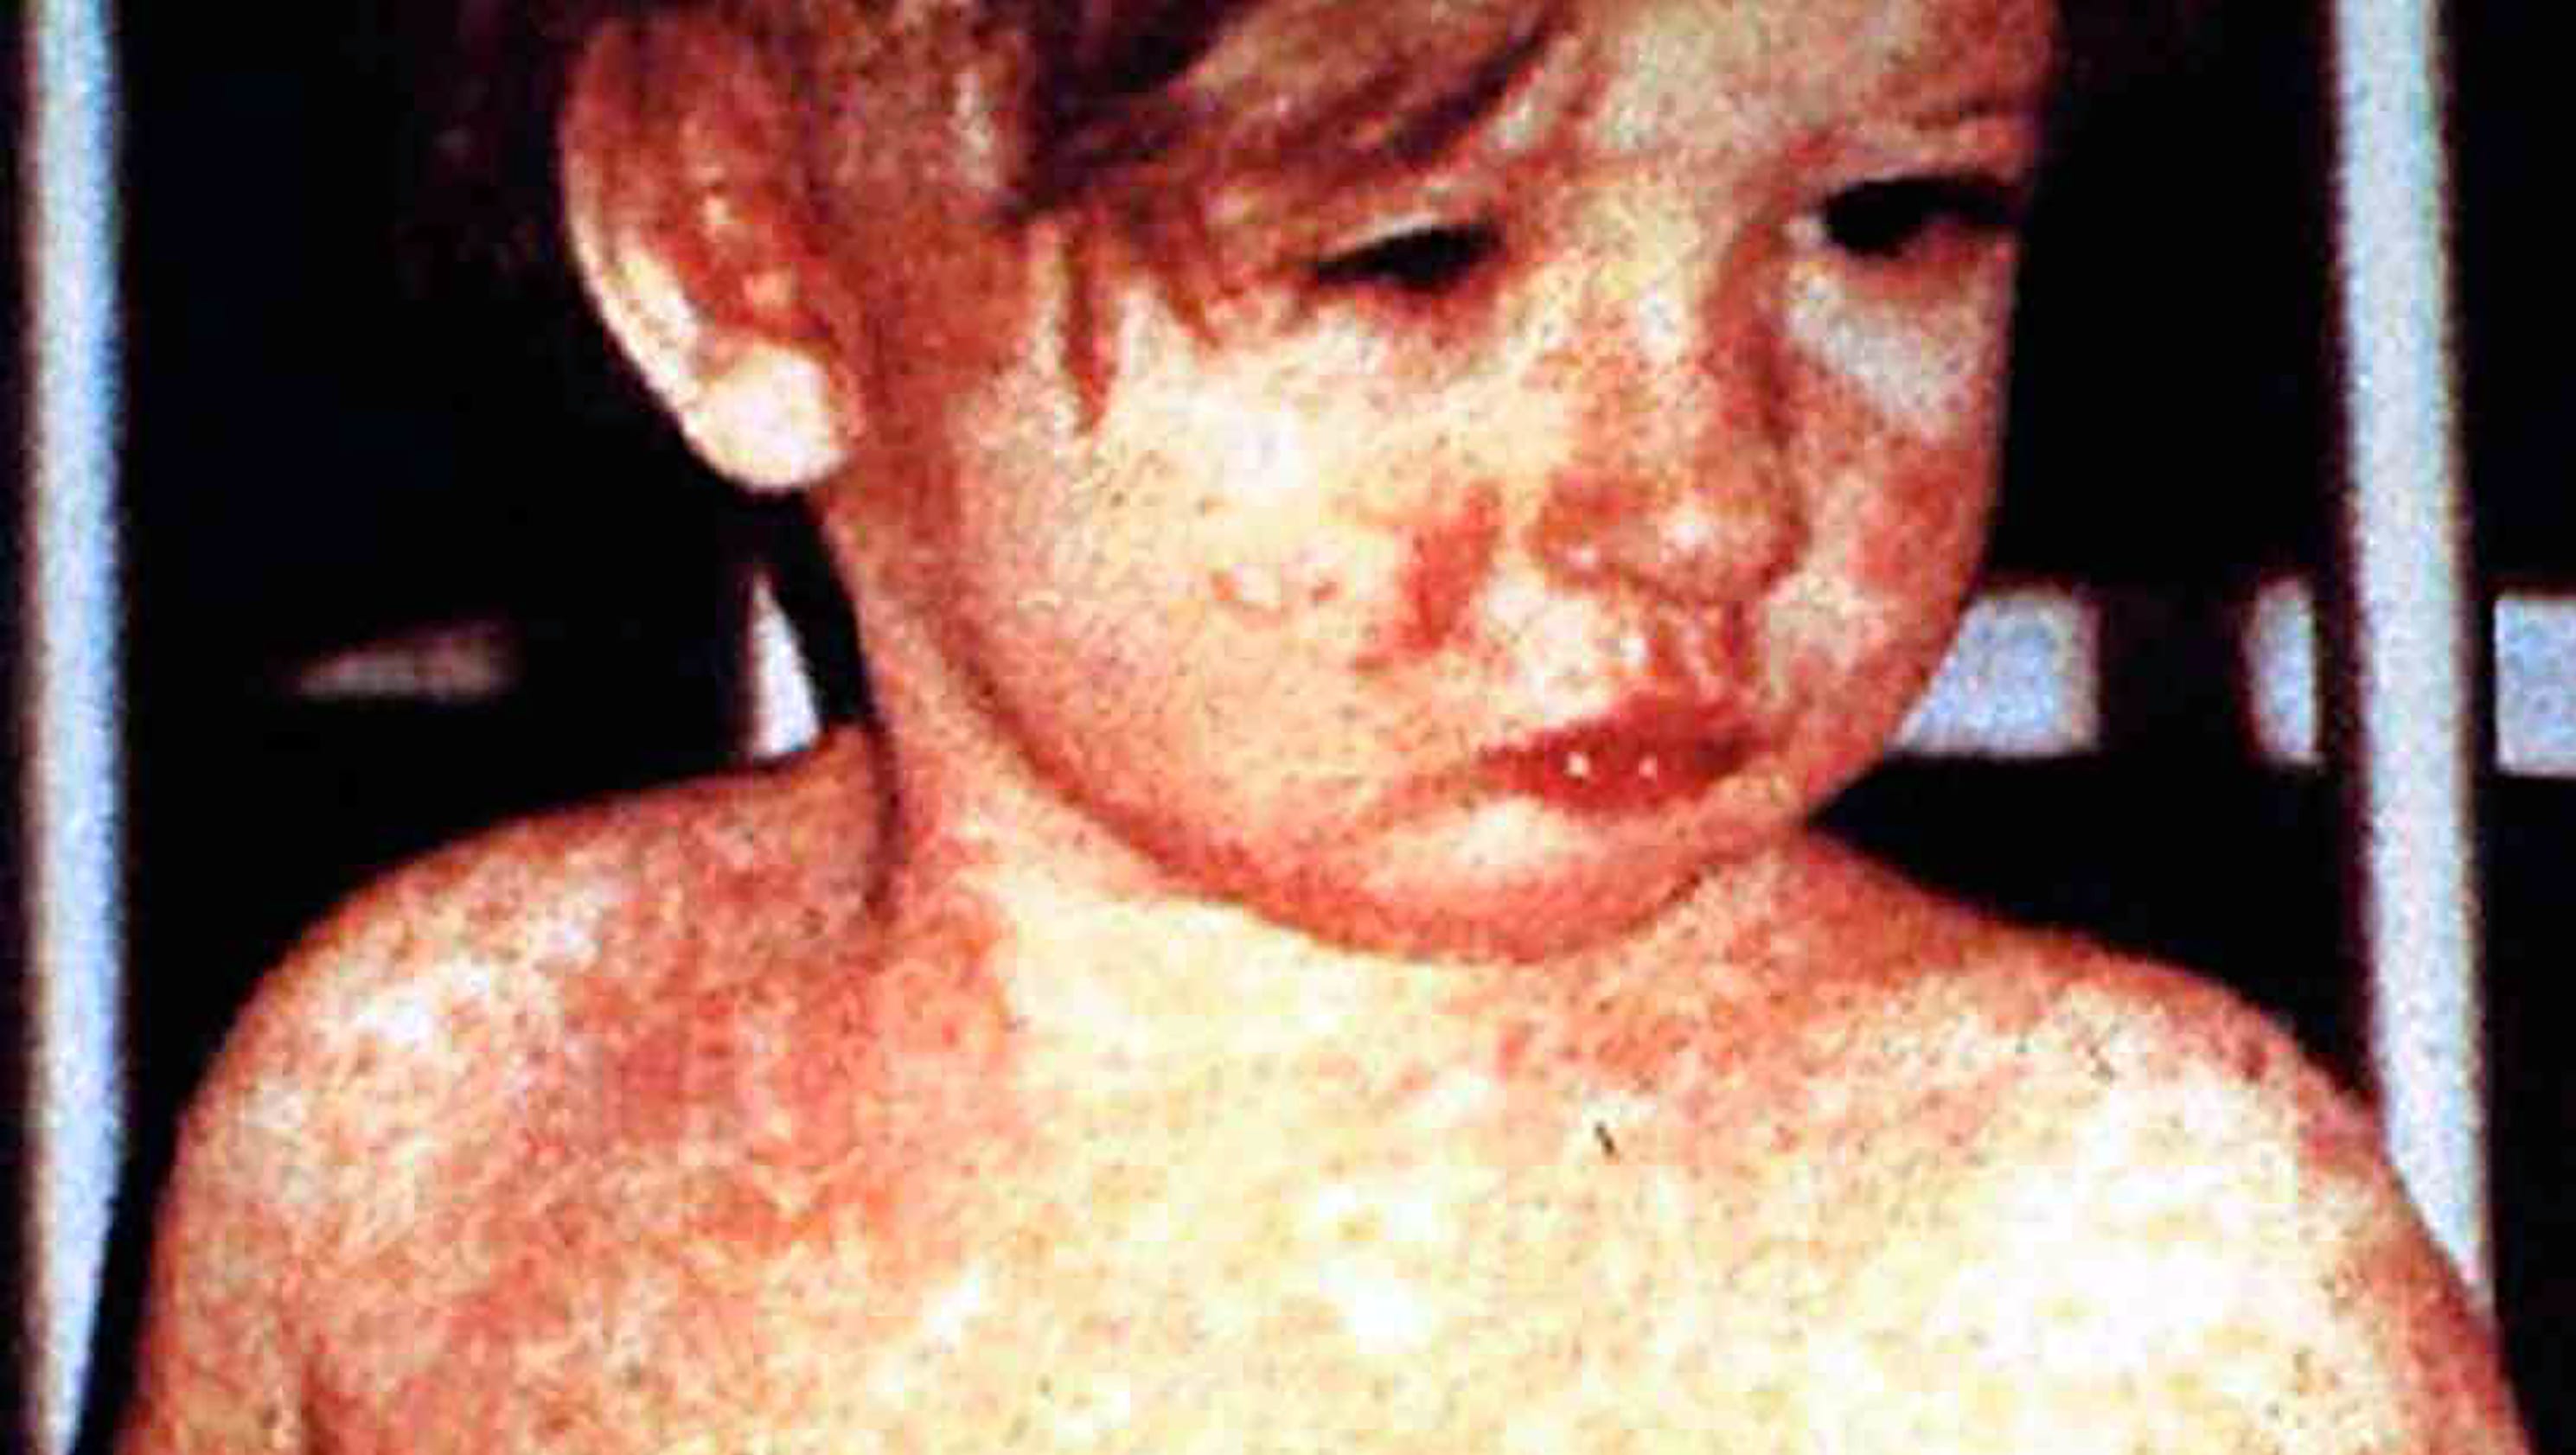 Measles: Passengers expose fellow travelers at 3 airports to virus3200 x 1680